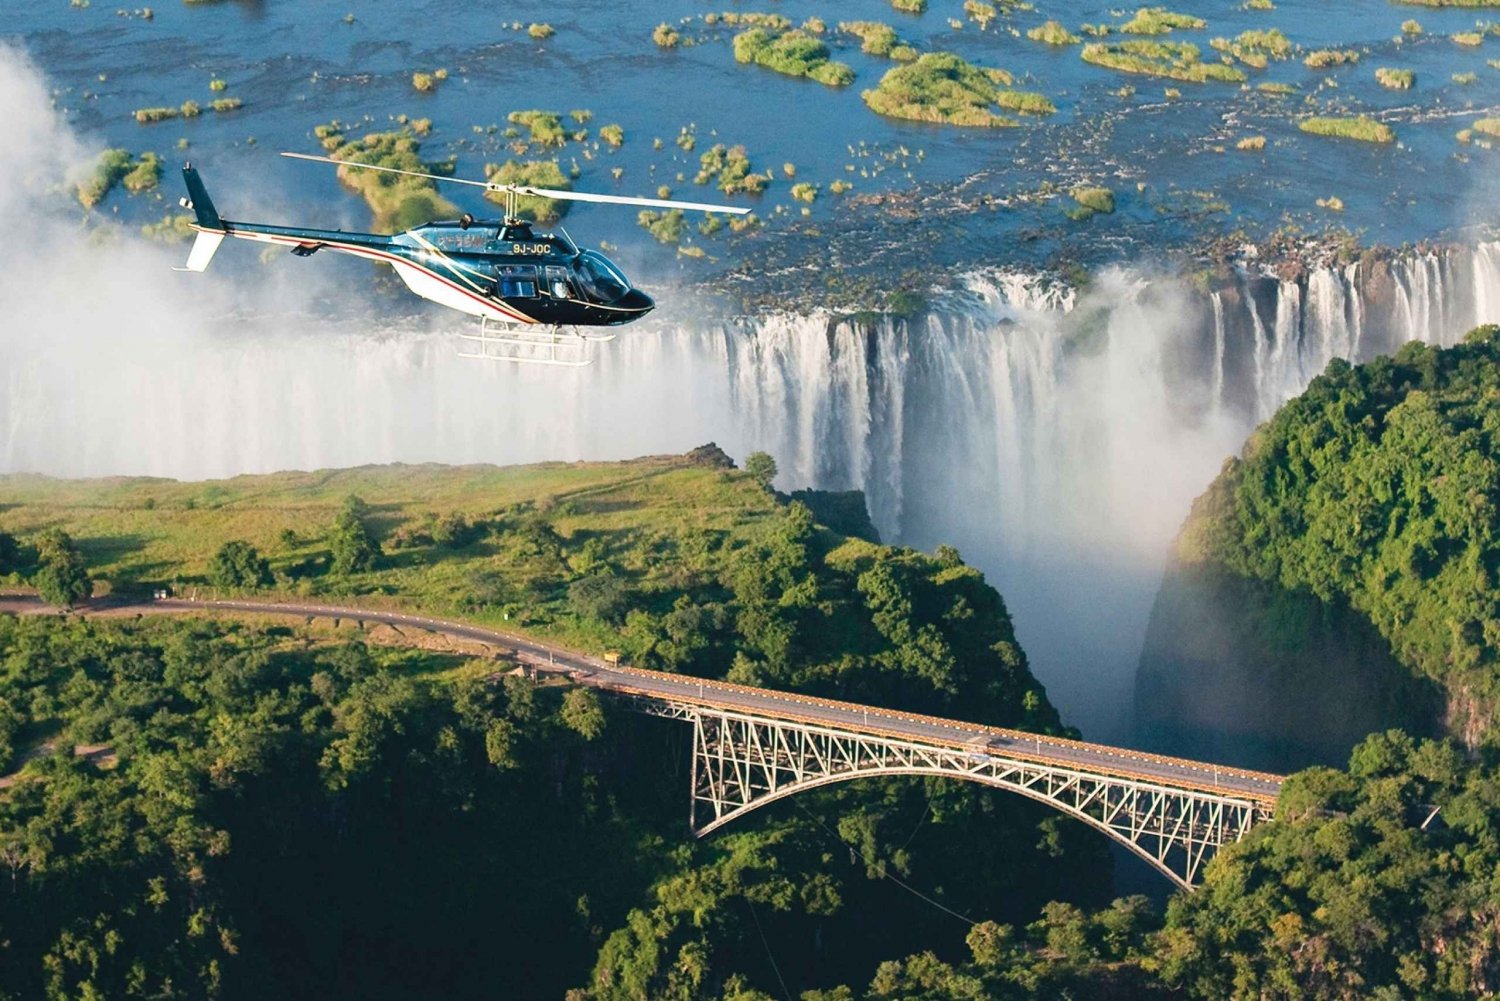 Guided Tour of the Victoria Falls - Scenic Photographic Tour